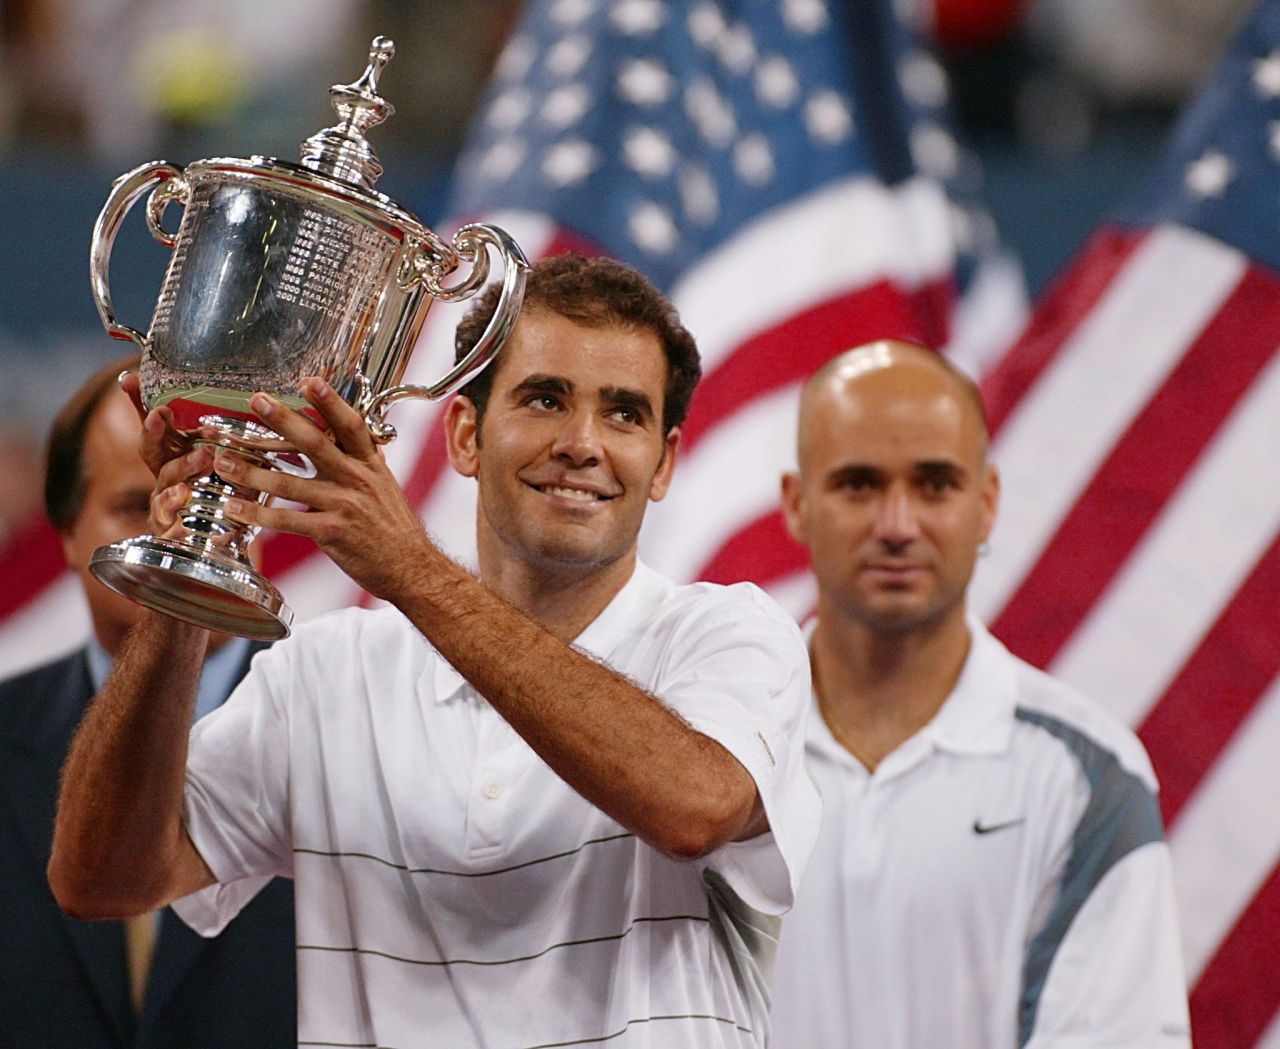 Pete Sampras enjoys his 14th and final grand slam triumph at the 2002 U.S. Open after beating Andre Agassi in the final.